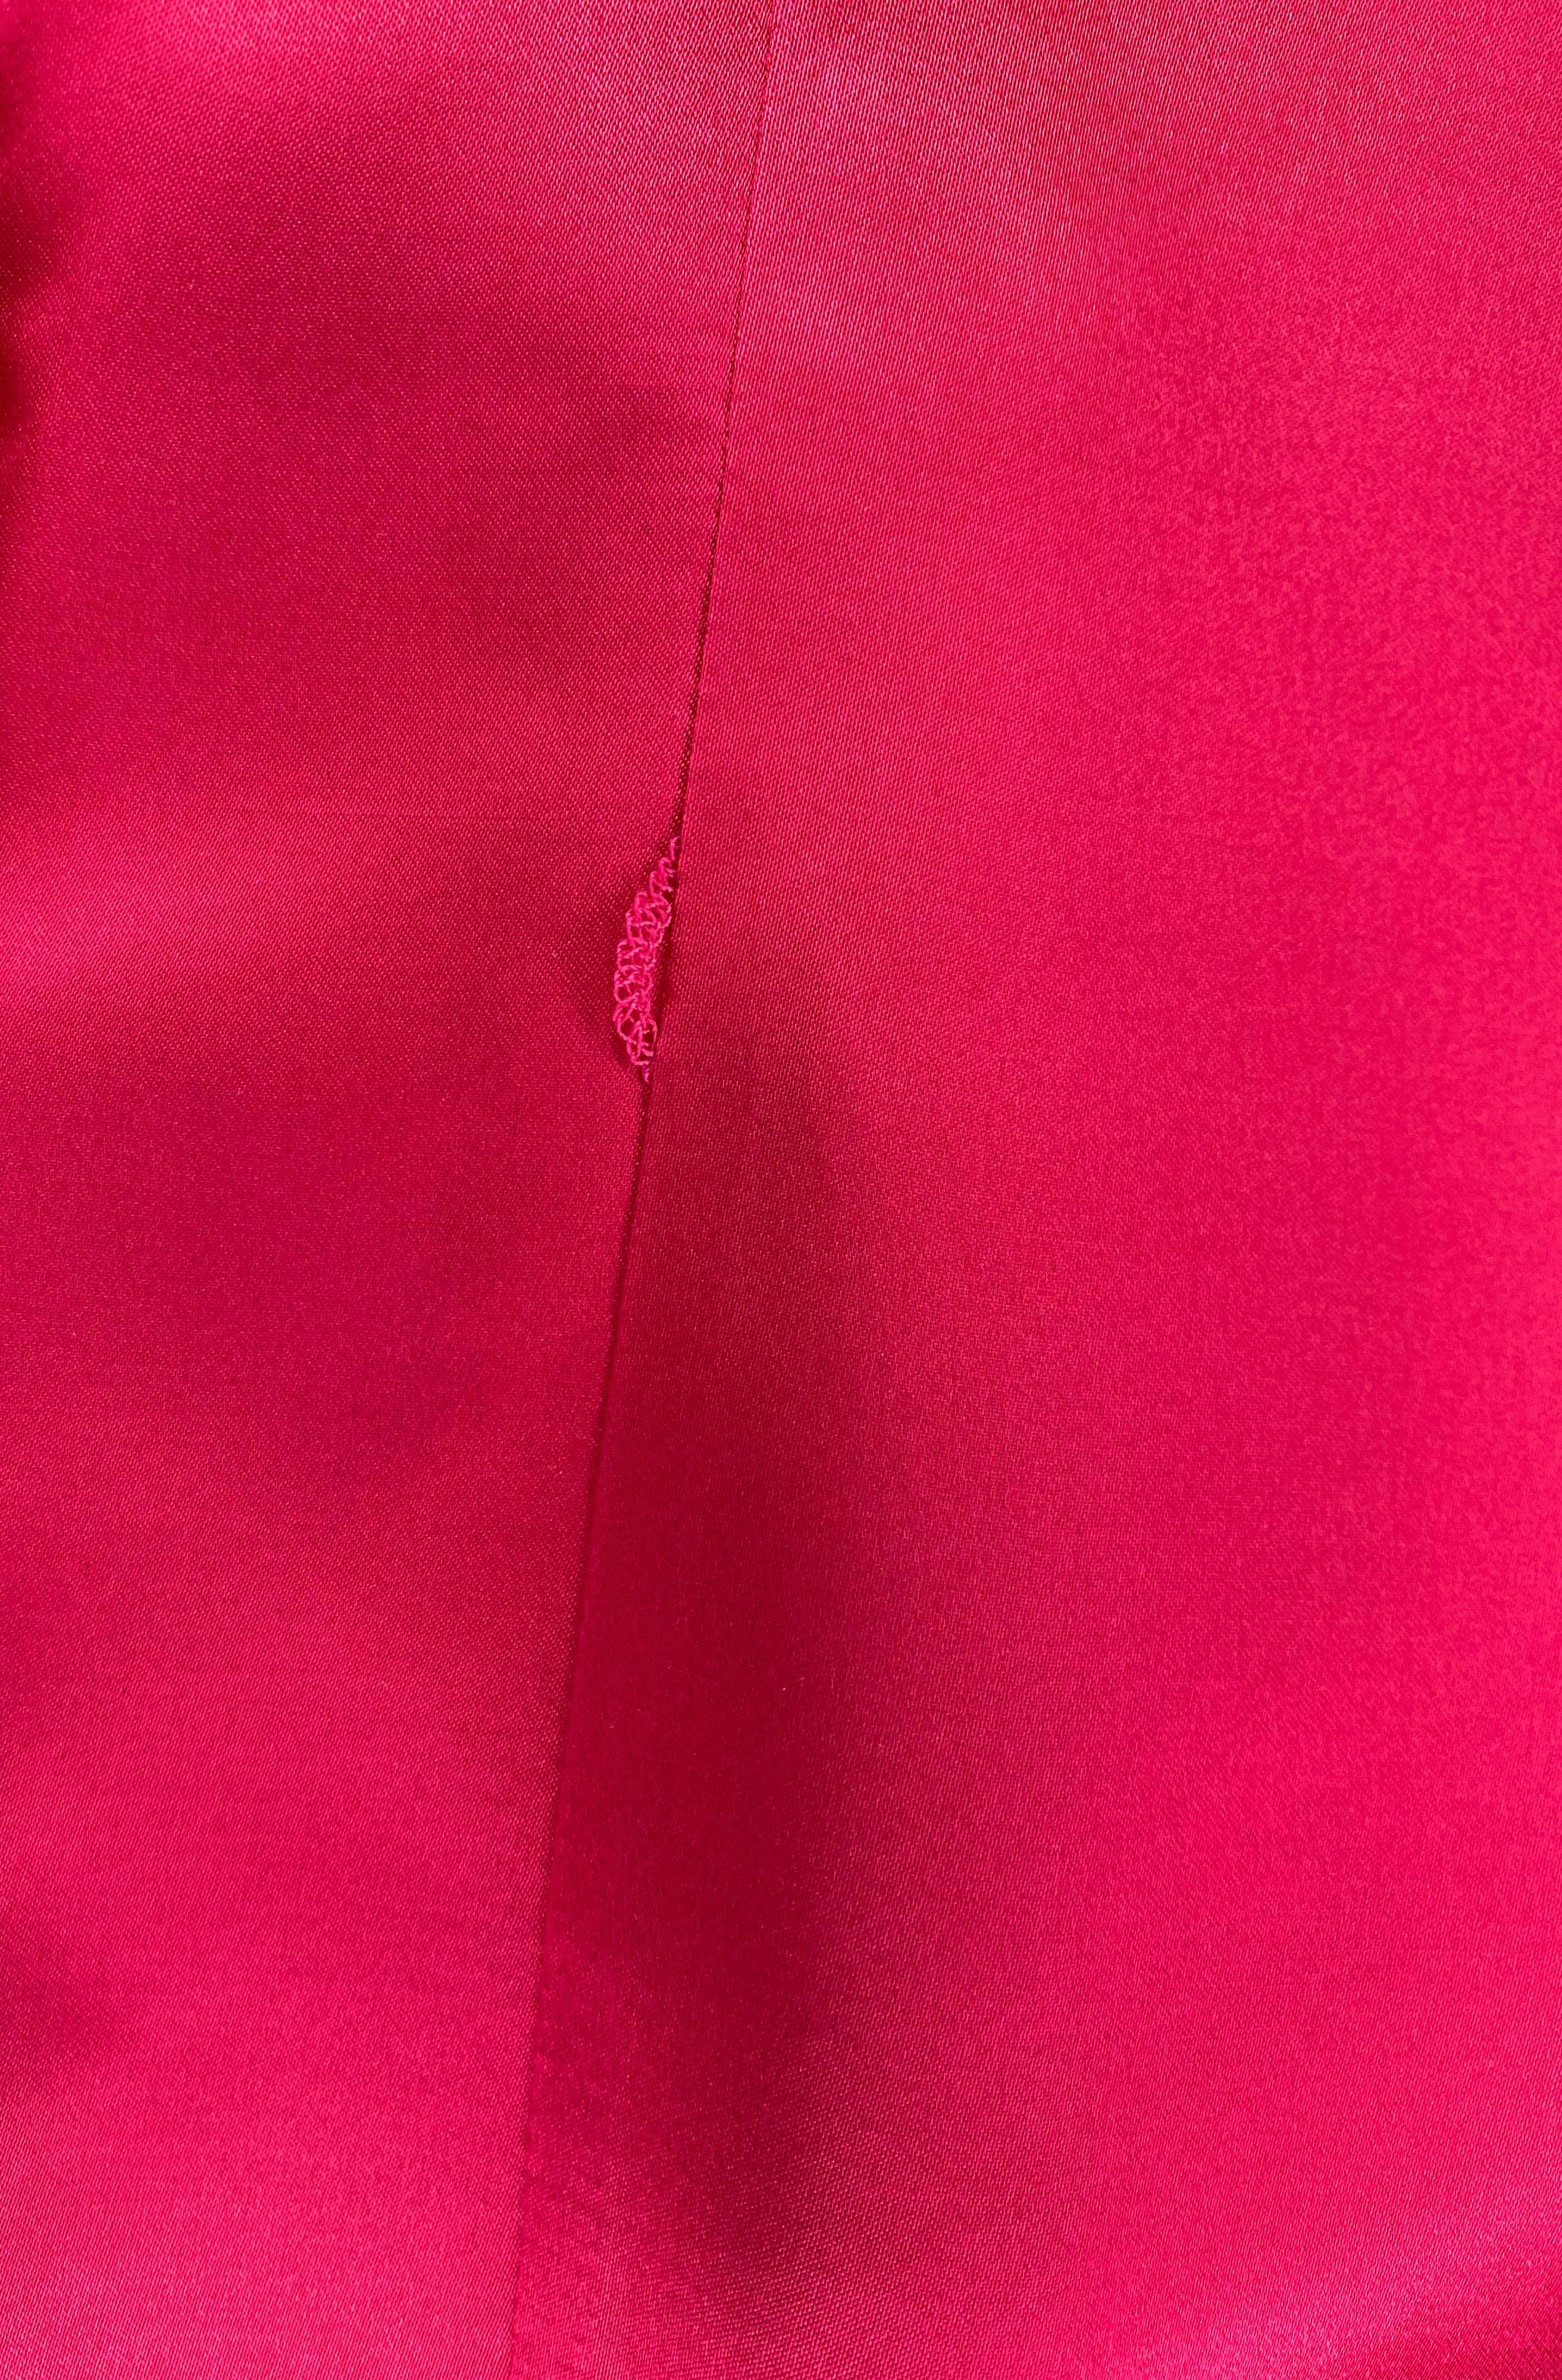 F/W 1996 Gucci by Tom Ford Hot Pink Silk Button Up Epaulette Military Top In Excellent Condition For Sale In West Hollywood, CA